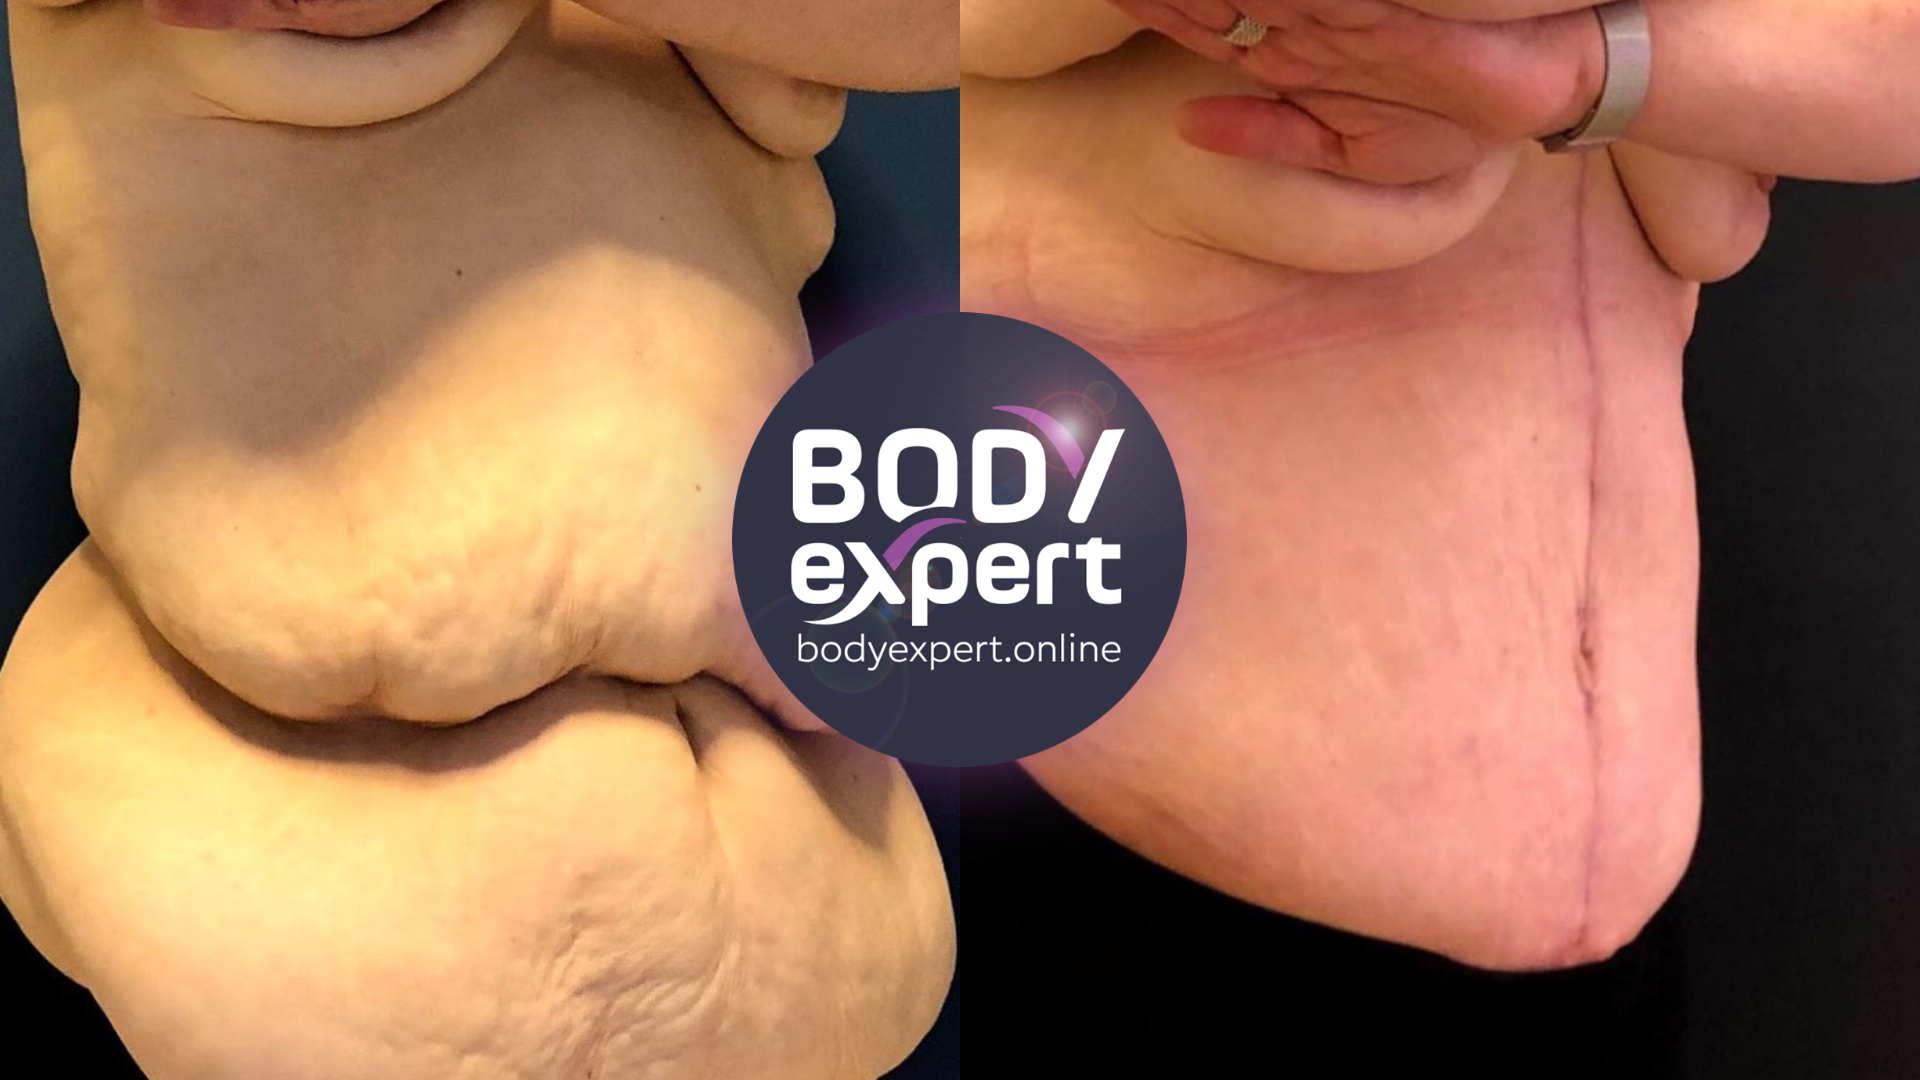 Breast Augmentation After Weight Loss